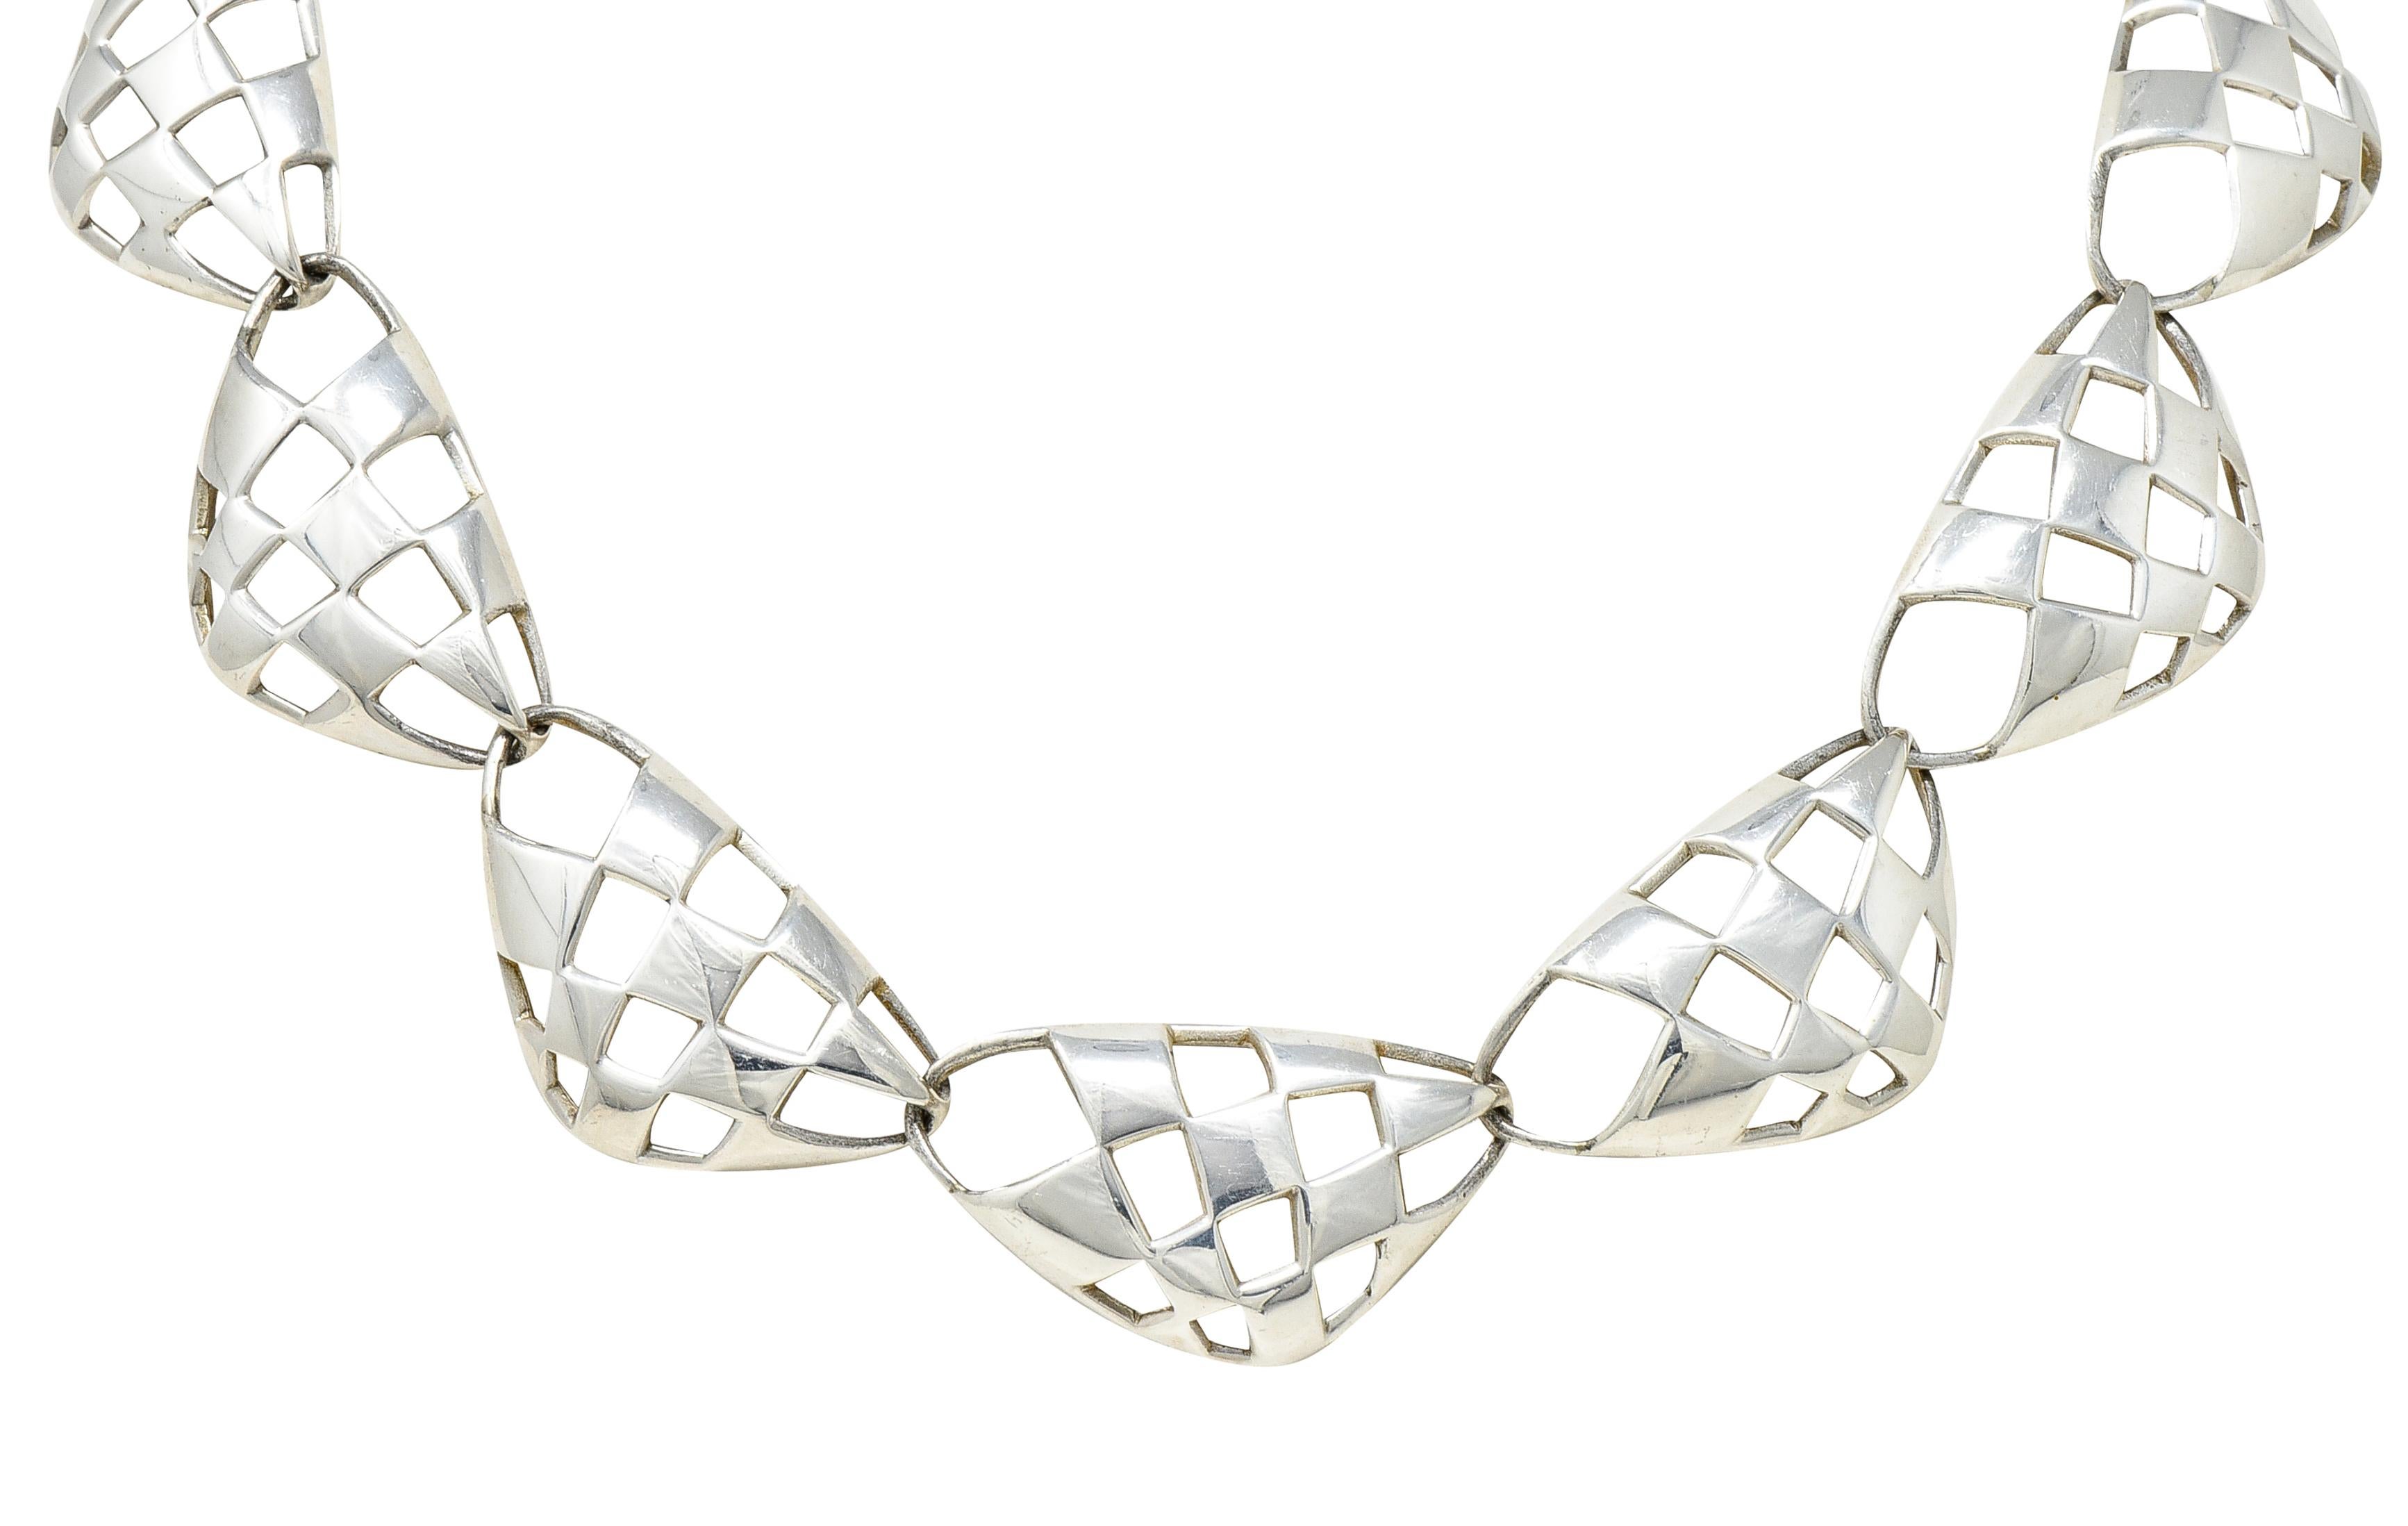 Vintage Angela Cummings Sterling Silver Checkerboard Link Collar Necklace, 1987 For Sale 2